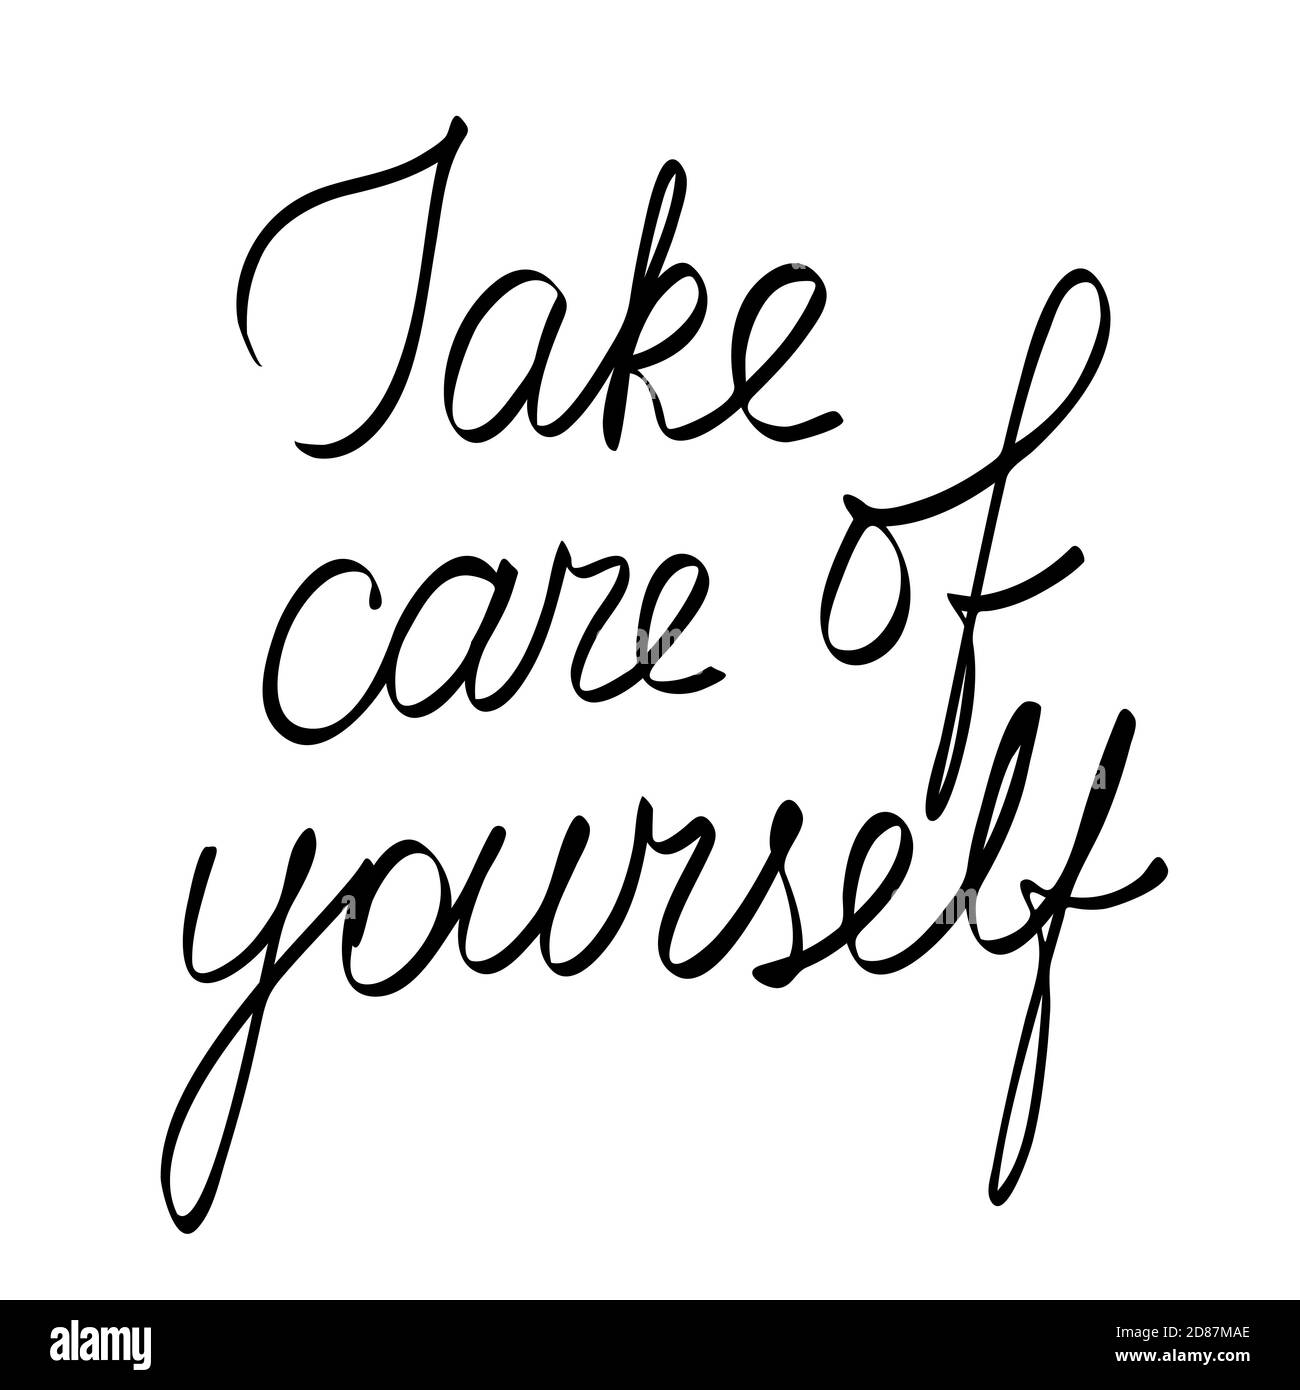 Take Care Of Yourself Phrase Editable Hand Drawn Vector Lettering Isolated For Greeting Card